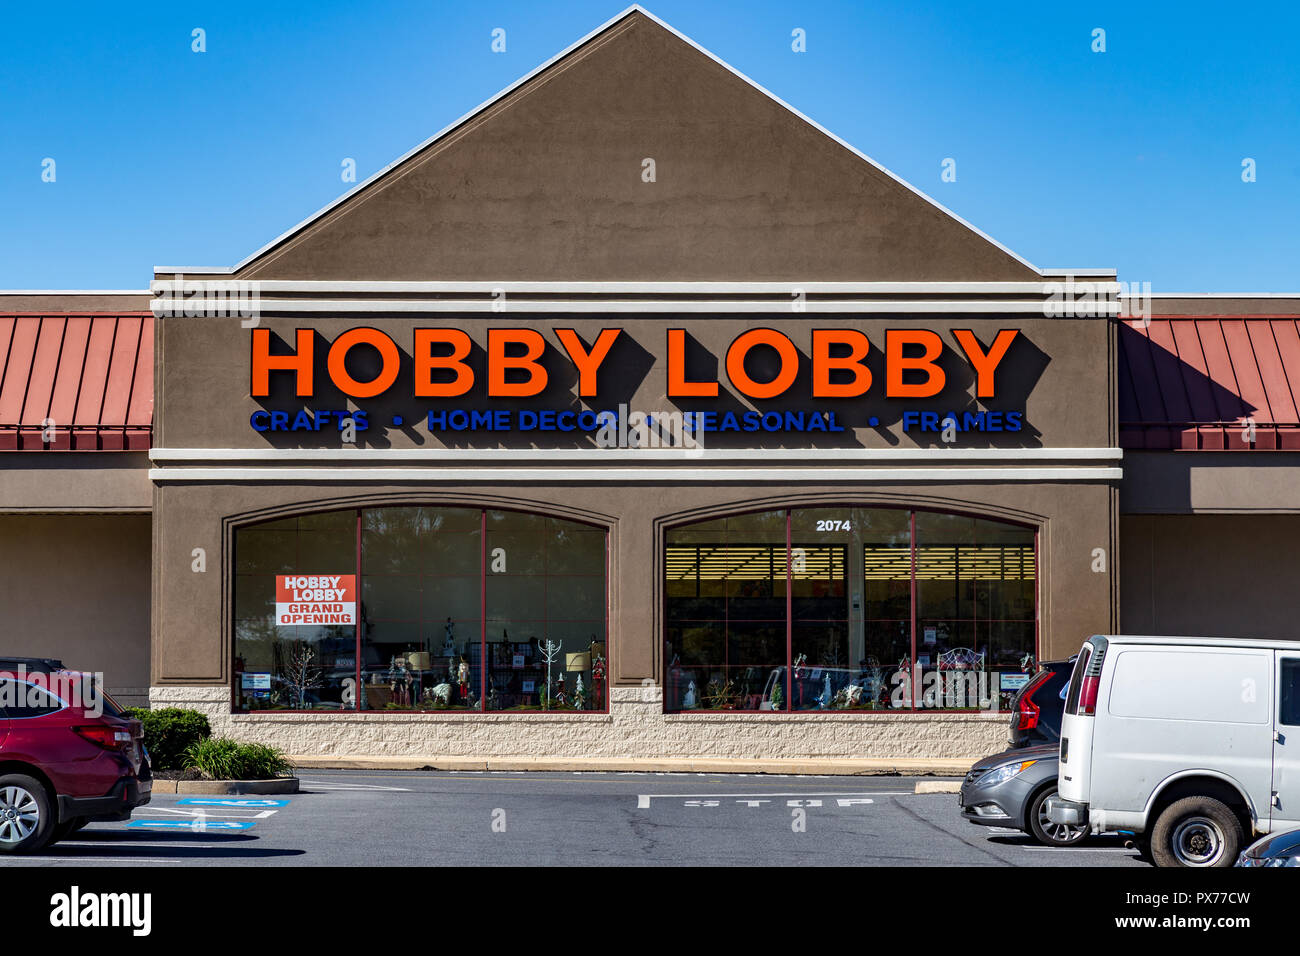 Lancaster, PA, USA - October 18, 2018: Hobby Lobby Stores is a private for-profit corporation that owns and operates a chain of American arts and craf Stock Photo